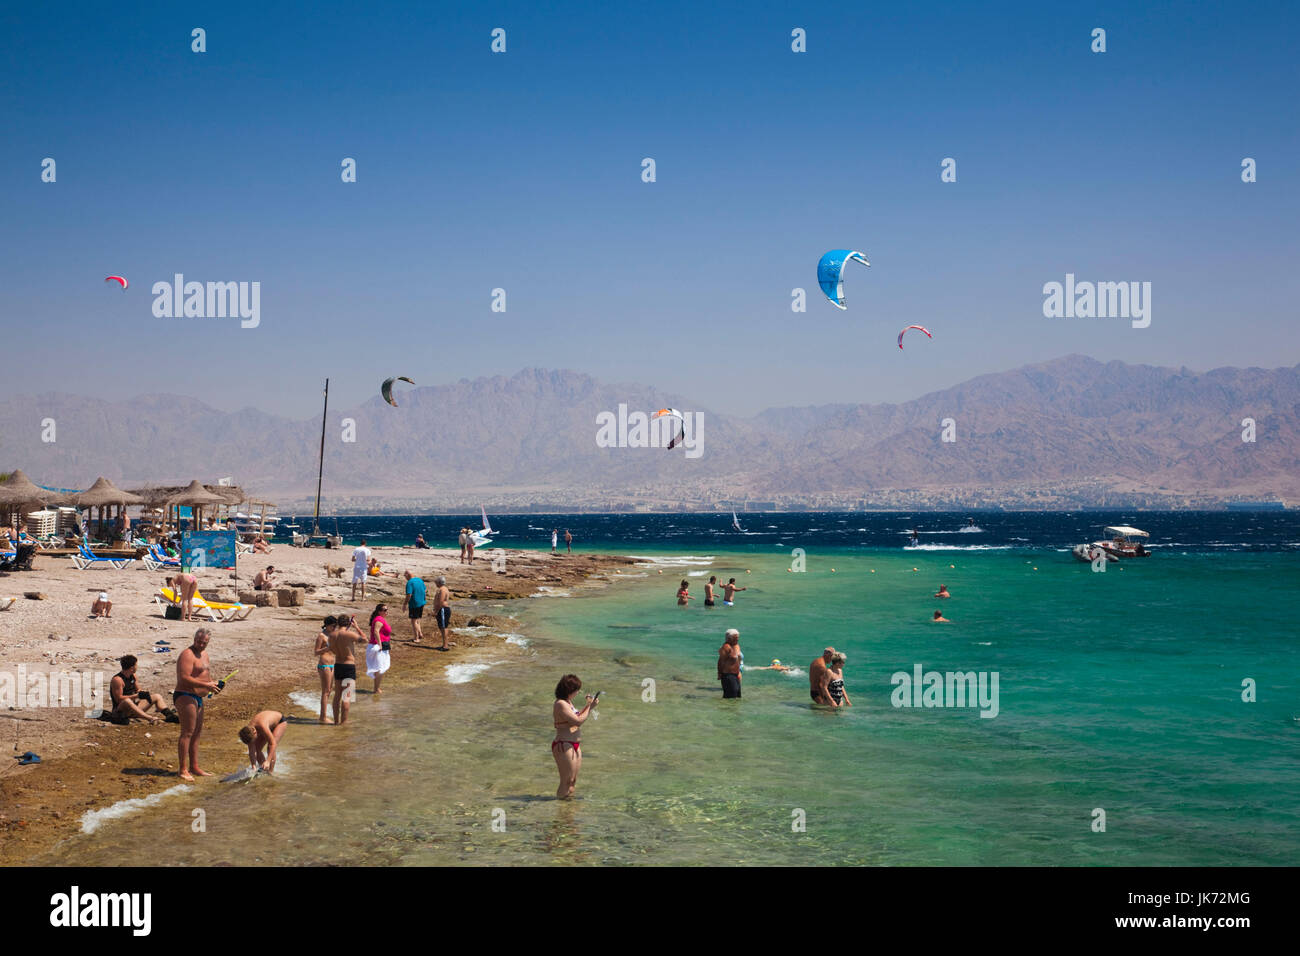 Israel, The Negev, Eilat, Red Sea, Coral beach, windsurfing Stock Photo